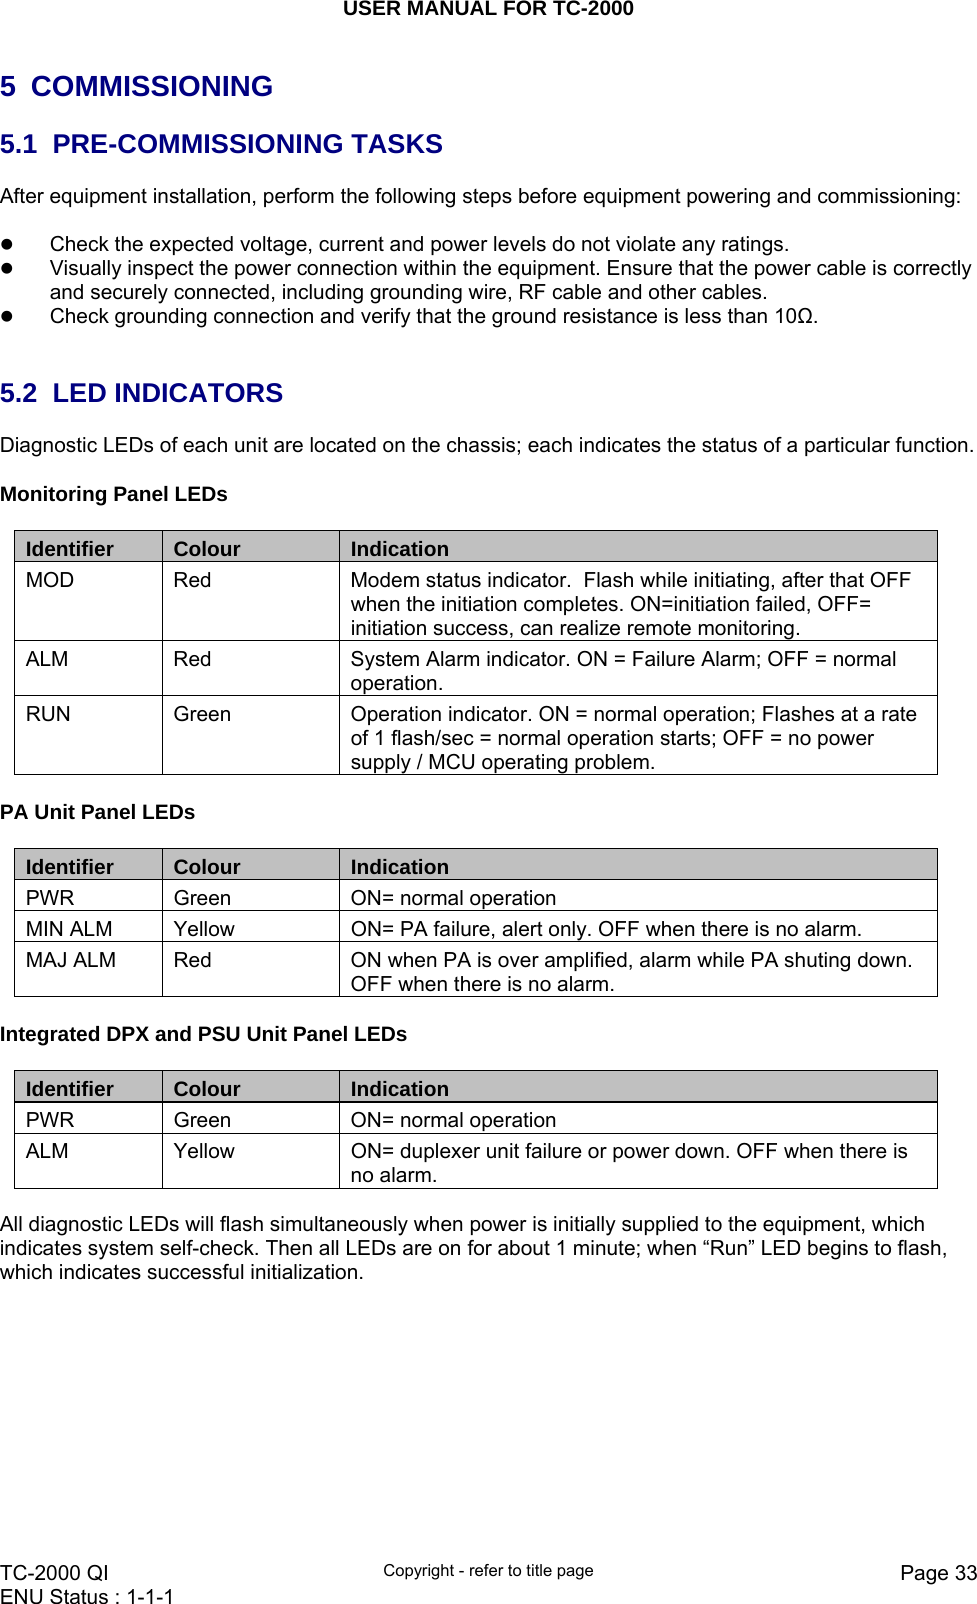 USER MANUAL FOR TC-2000   TC-2000 QI  Copyright - refer to title page  Page 33ENU Status : 1-1-1    5 COMMISSIONING  5.1 PRE-COMMISSIONING TASKS After equipment installation, perform the following steps before equipment powering and commissioning:  z Check the expected voltage, current and power levels do not violate any ratings.  z Visually inspect the power connection within the equipment. Ensure that the power cable is correctly and securely connected, including grounding wire, RF cable and other cables.  z Check grounding connection and verify that the ground resistance is less than 10Ω.   5.2 LED INDICATORS Diagnostic LEDs of each unit are located on the chassis; each indicates the status of a particular function.  Monitoring Panel LEDs  Identifier  Colour  Indication MOD  Red  Modem status indicator.  Flash while initiating, after that OFF when the initiation completes. ON=initiation failed, OFF= initiation success, can realize remote monitoring.  ALM  Red  System Alarm indicator. ON = Failure Alarm; OFF = normal operation. RUN  Green  Operation indicator. ON = normal operation; Flashes at a rate of 1 flash/sec = normal operation starts; OFF = no power supply / MCU operating problem.  PA Unit Panel LEDs  Identifier  Colour  Indication PWR  Green  ON= normal operation MIN ALM  Yellow  ON= PA failure, alert only. OFF when there is no alarm. MAJ ALM  Red  ON when PA is over amplified, alarm while PA shuting down. OFF when there is no alarm.  Integrated DPX and PSU Unit Panel LEDs  Identifier  Colour  Indication PWR  Green  ON= normal operation ALM  Yellow  ON= duplexer unit failure or power down. OFF when there is no alarm.  All diagnostic LEDs will flash simultaneously when power is initially supplied to the equipment, which indicates system self-check. Then all LEDs are on for about 1 minute; when “Run” LED begins to flash, which indicates successful initialization.   